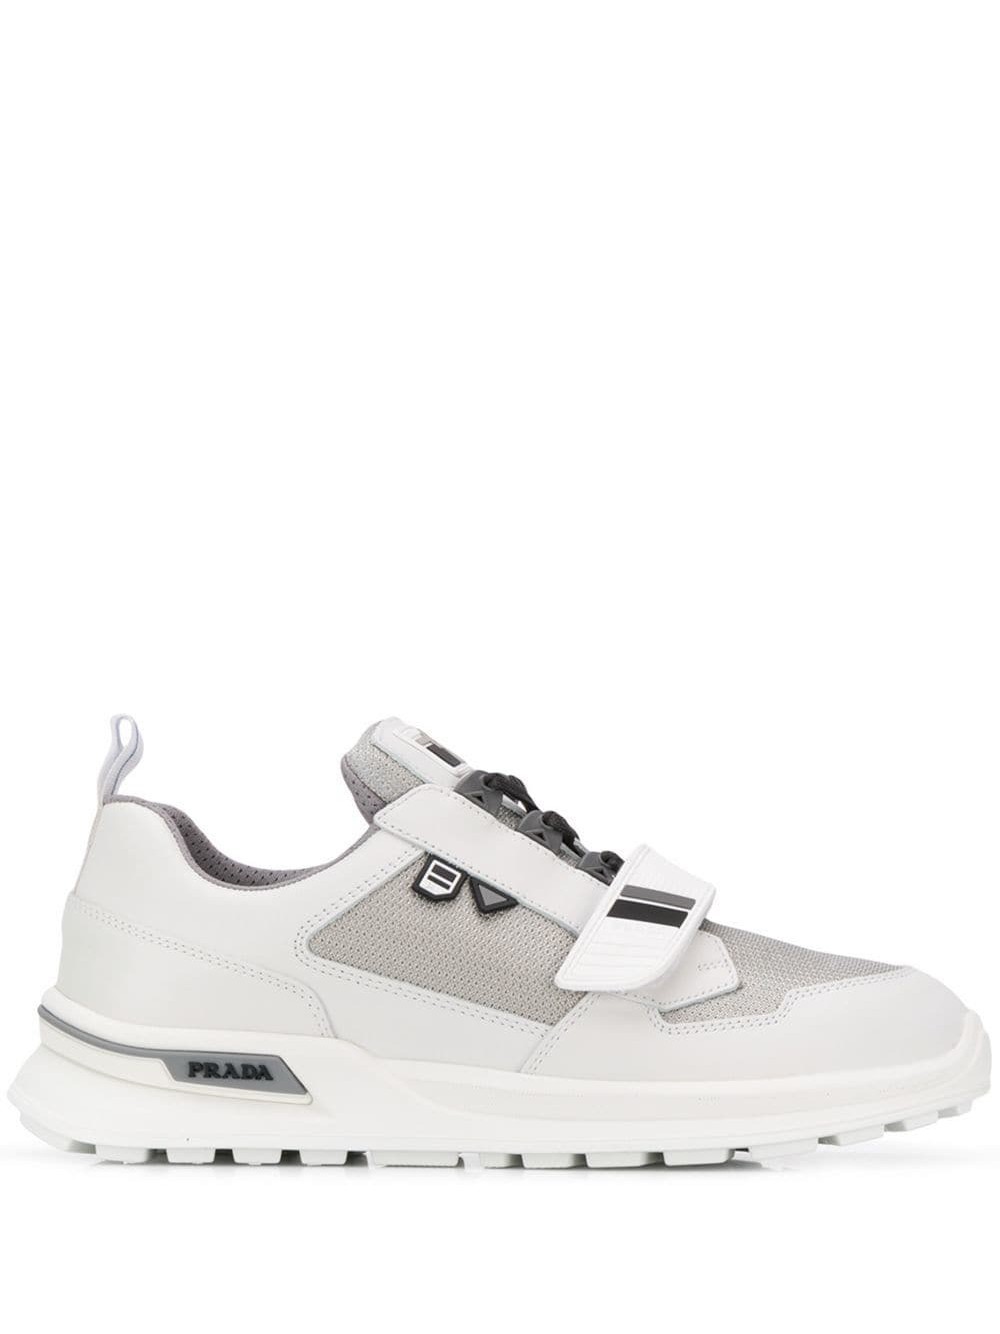 prada WORK SNEAKERS available on 